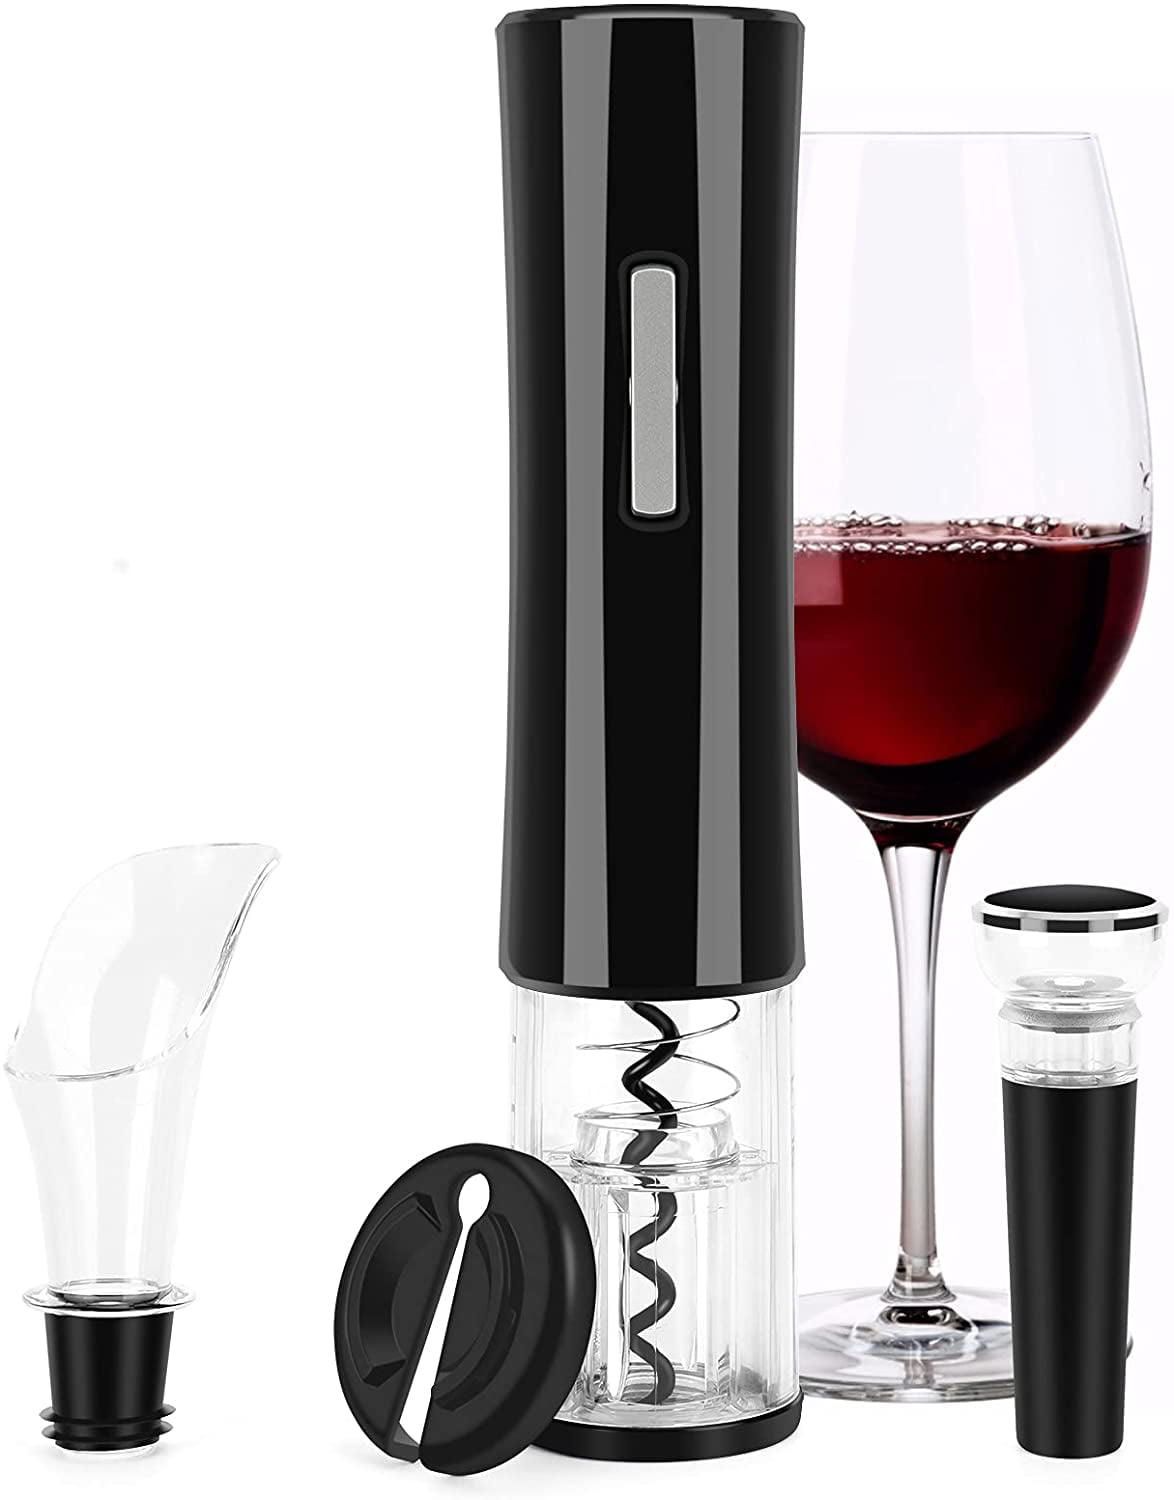 4 in 1 Battery Operated Wine Opener Gift Set with Foil Cutter Stainless Steel Cooking Gifts  Electric Wine Bottle Opener Set Vacuum Wine Stopper and Aerator Pourer Electric Corkscrew